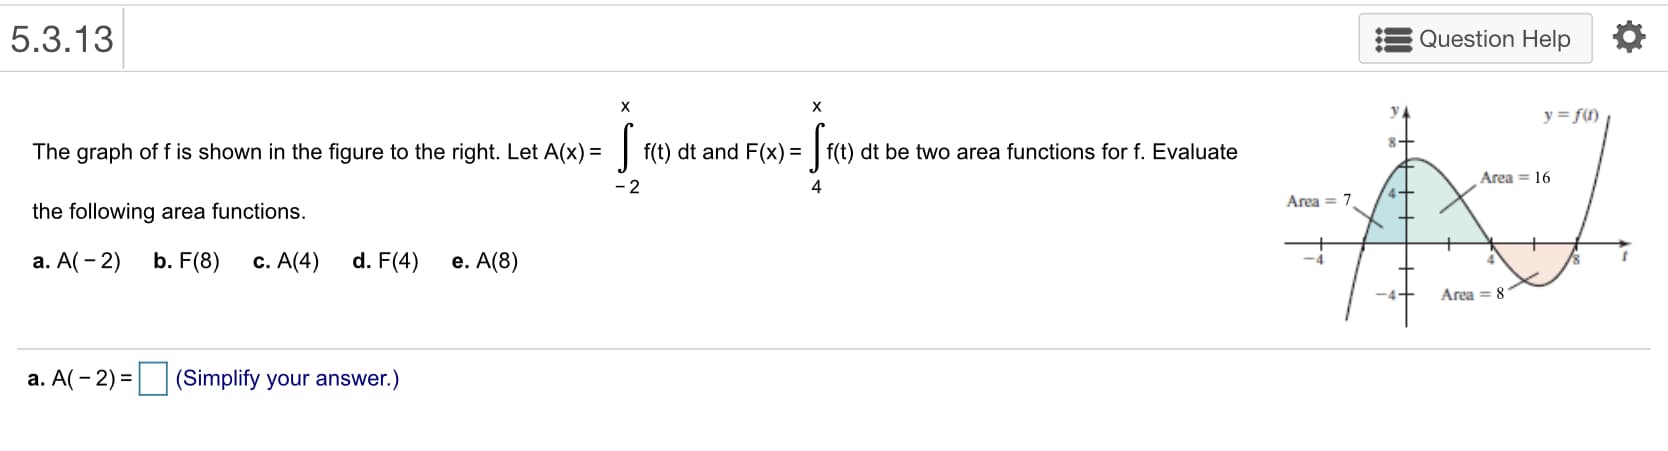 : Question Help
5.3.13
The graph of f is shown in the figure to the right. Let A(x)ft) dt and F(x)f(t) dt be two area functions for f. Evaluate
the following area functions.
a. A(-2) b. F(8) c. A(4) d. F(4) e. A(8)
Area 16
4
Area 7
-it
Area = 8
a. A(-2-1 (Simplify your answer.)
